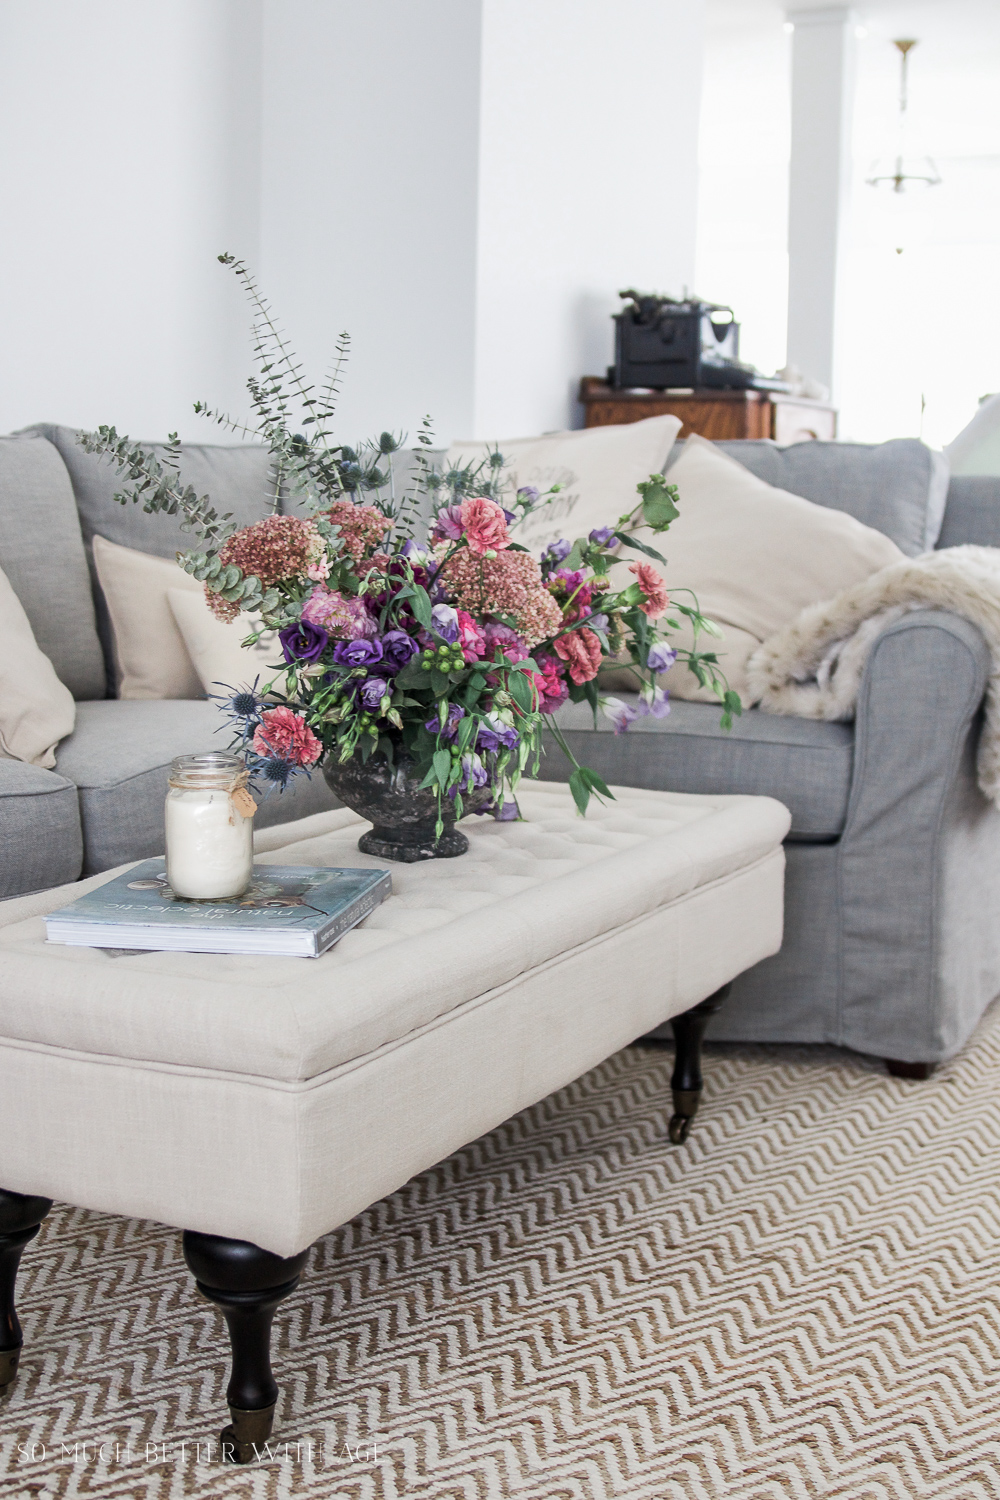 A tufted neutral ottoman with a large display of flowers on it, and gray couch behind it.